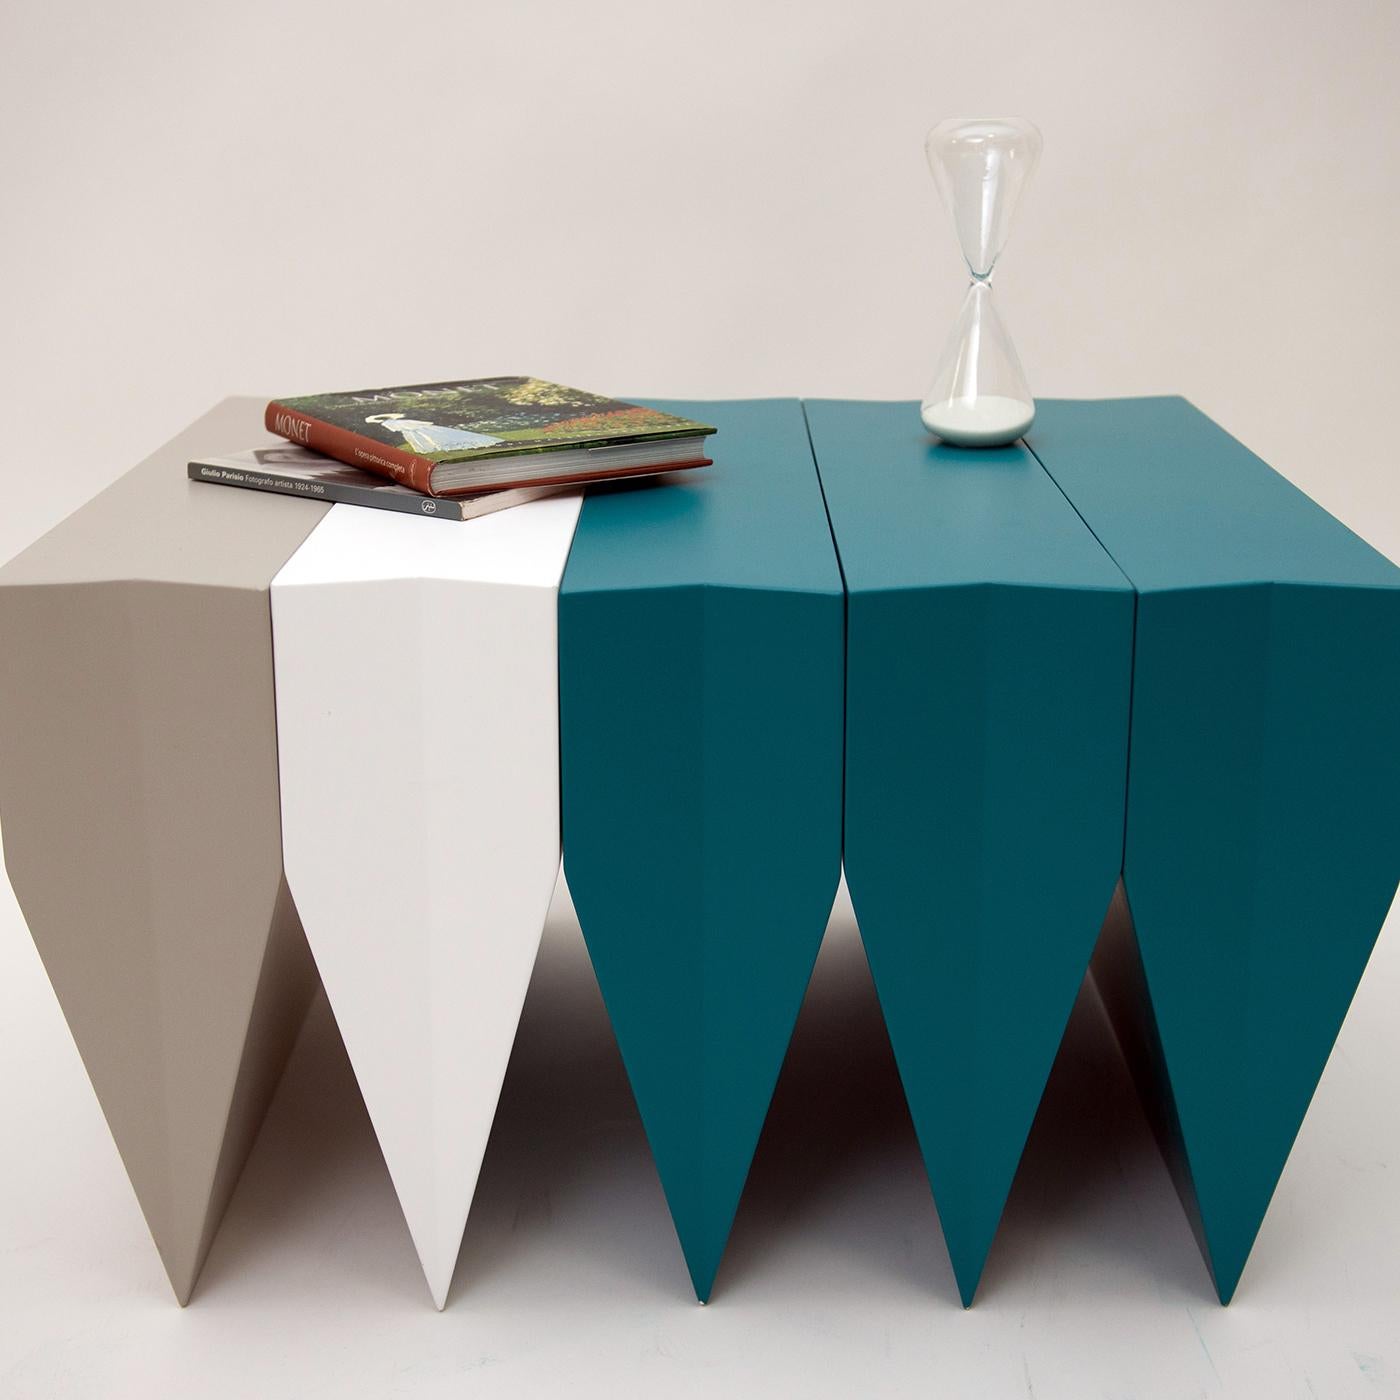 The multi wedge coffee table by Alberto Guarriello makes a remarkable statement of strength with its bold and contemporary style. A study of how the repetition of unstable elements can come together to produce one solid item of exceptional